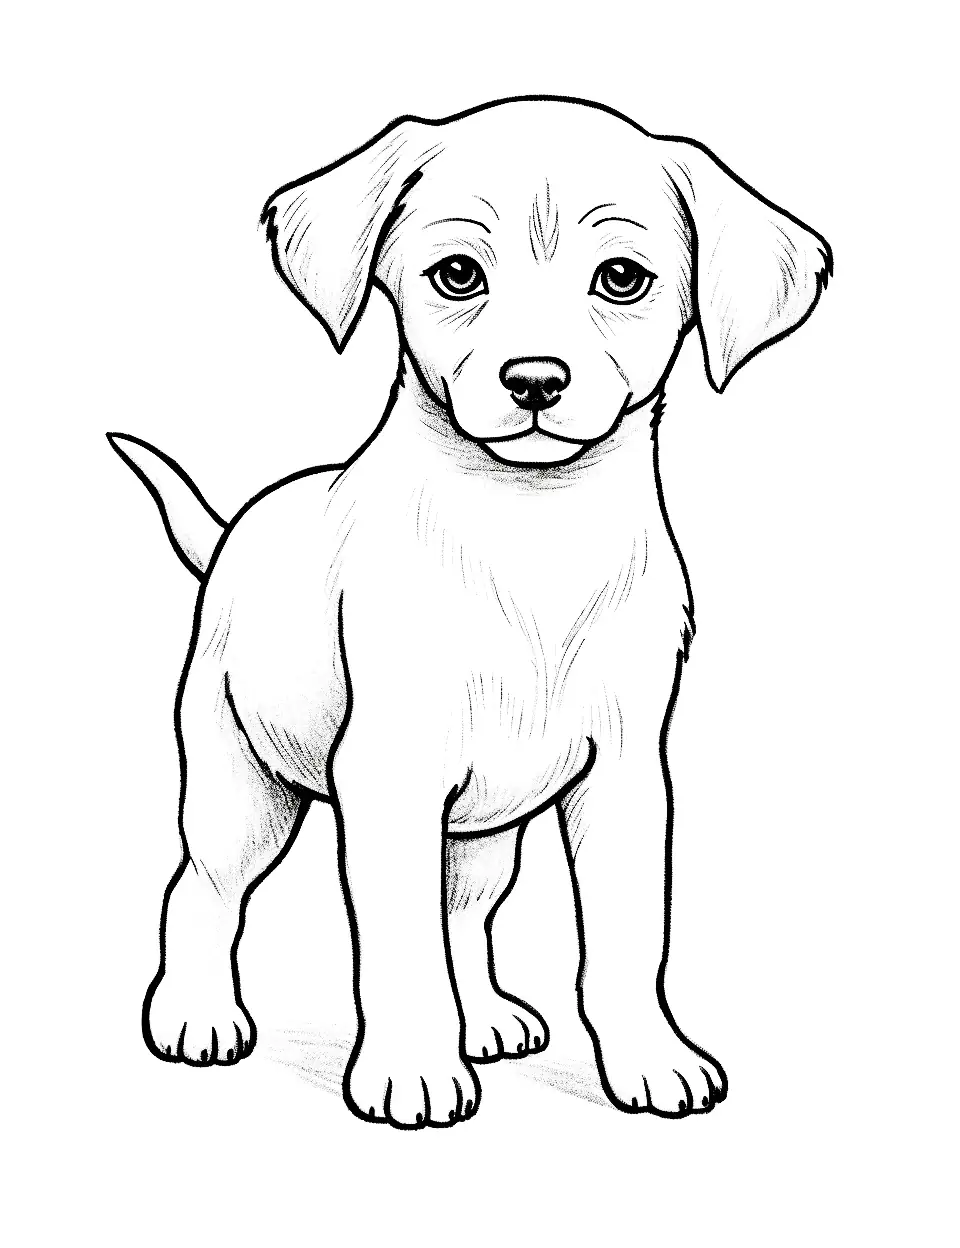 Innocent Eyes Labrador Pup Puppy Coloring Page - A Labrador puppy with expressive eyes and floppy ears.